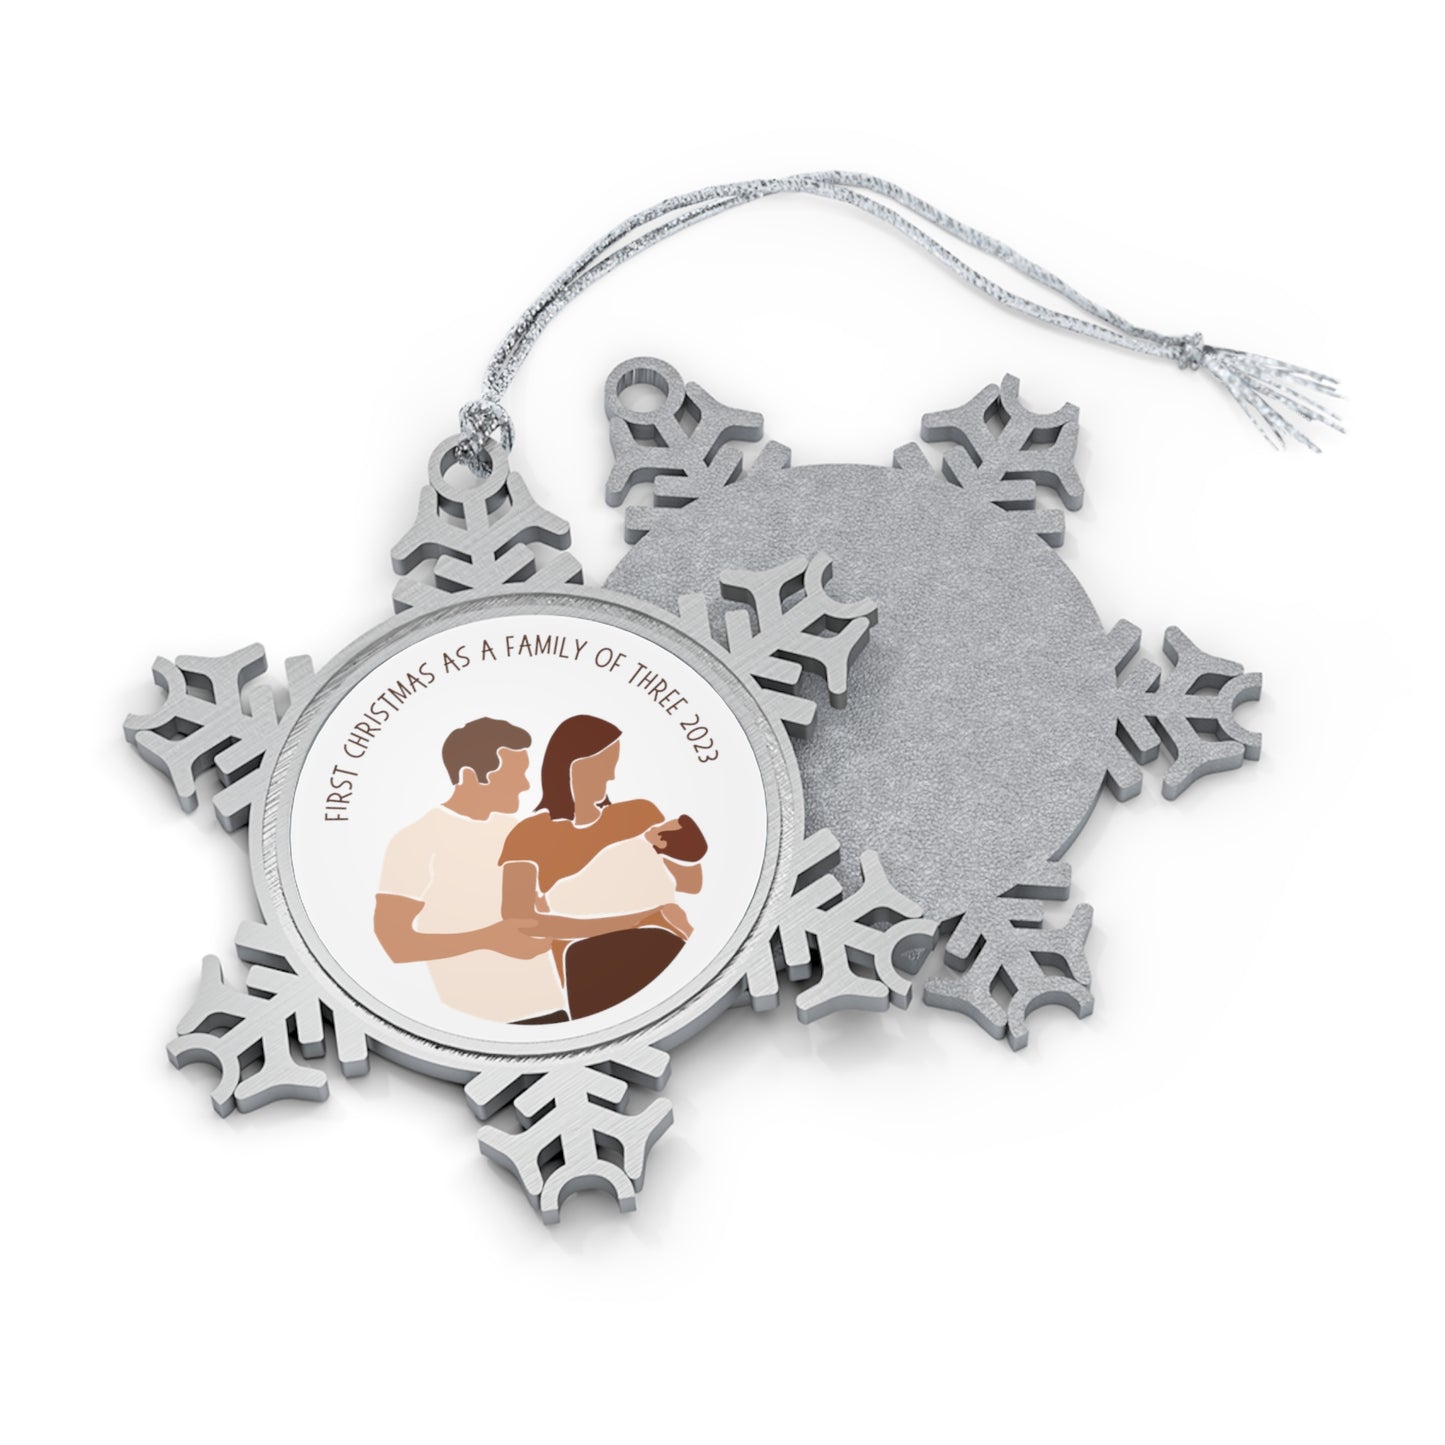 Personalised Pewter Snowflake Ornament | 1st Christmas as Family of 3